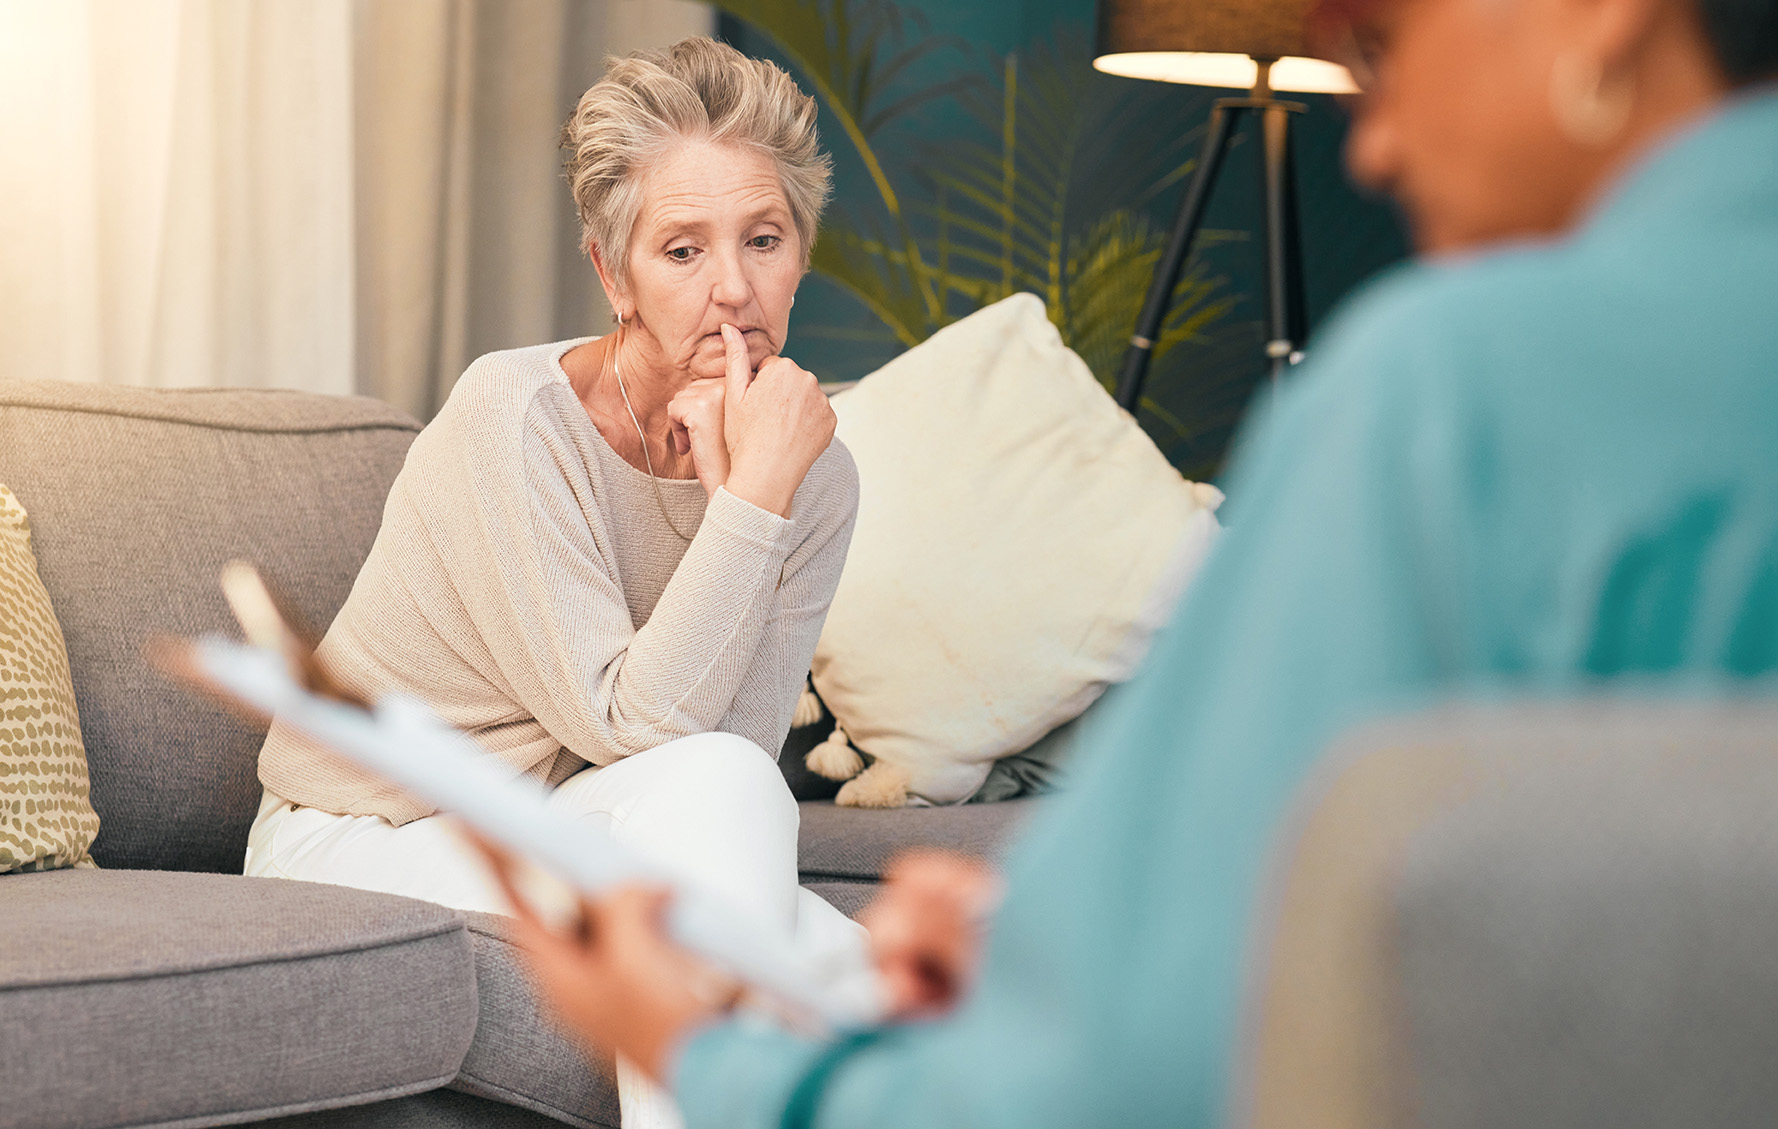 An older woman looks pensive during a discussion with possible therapist holding papers.